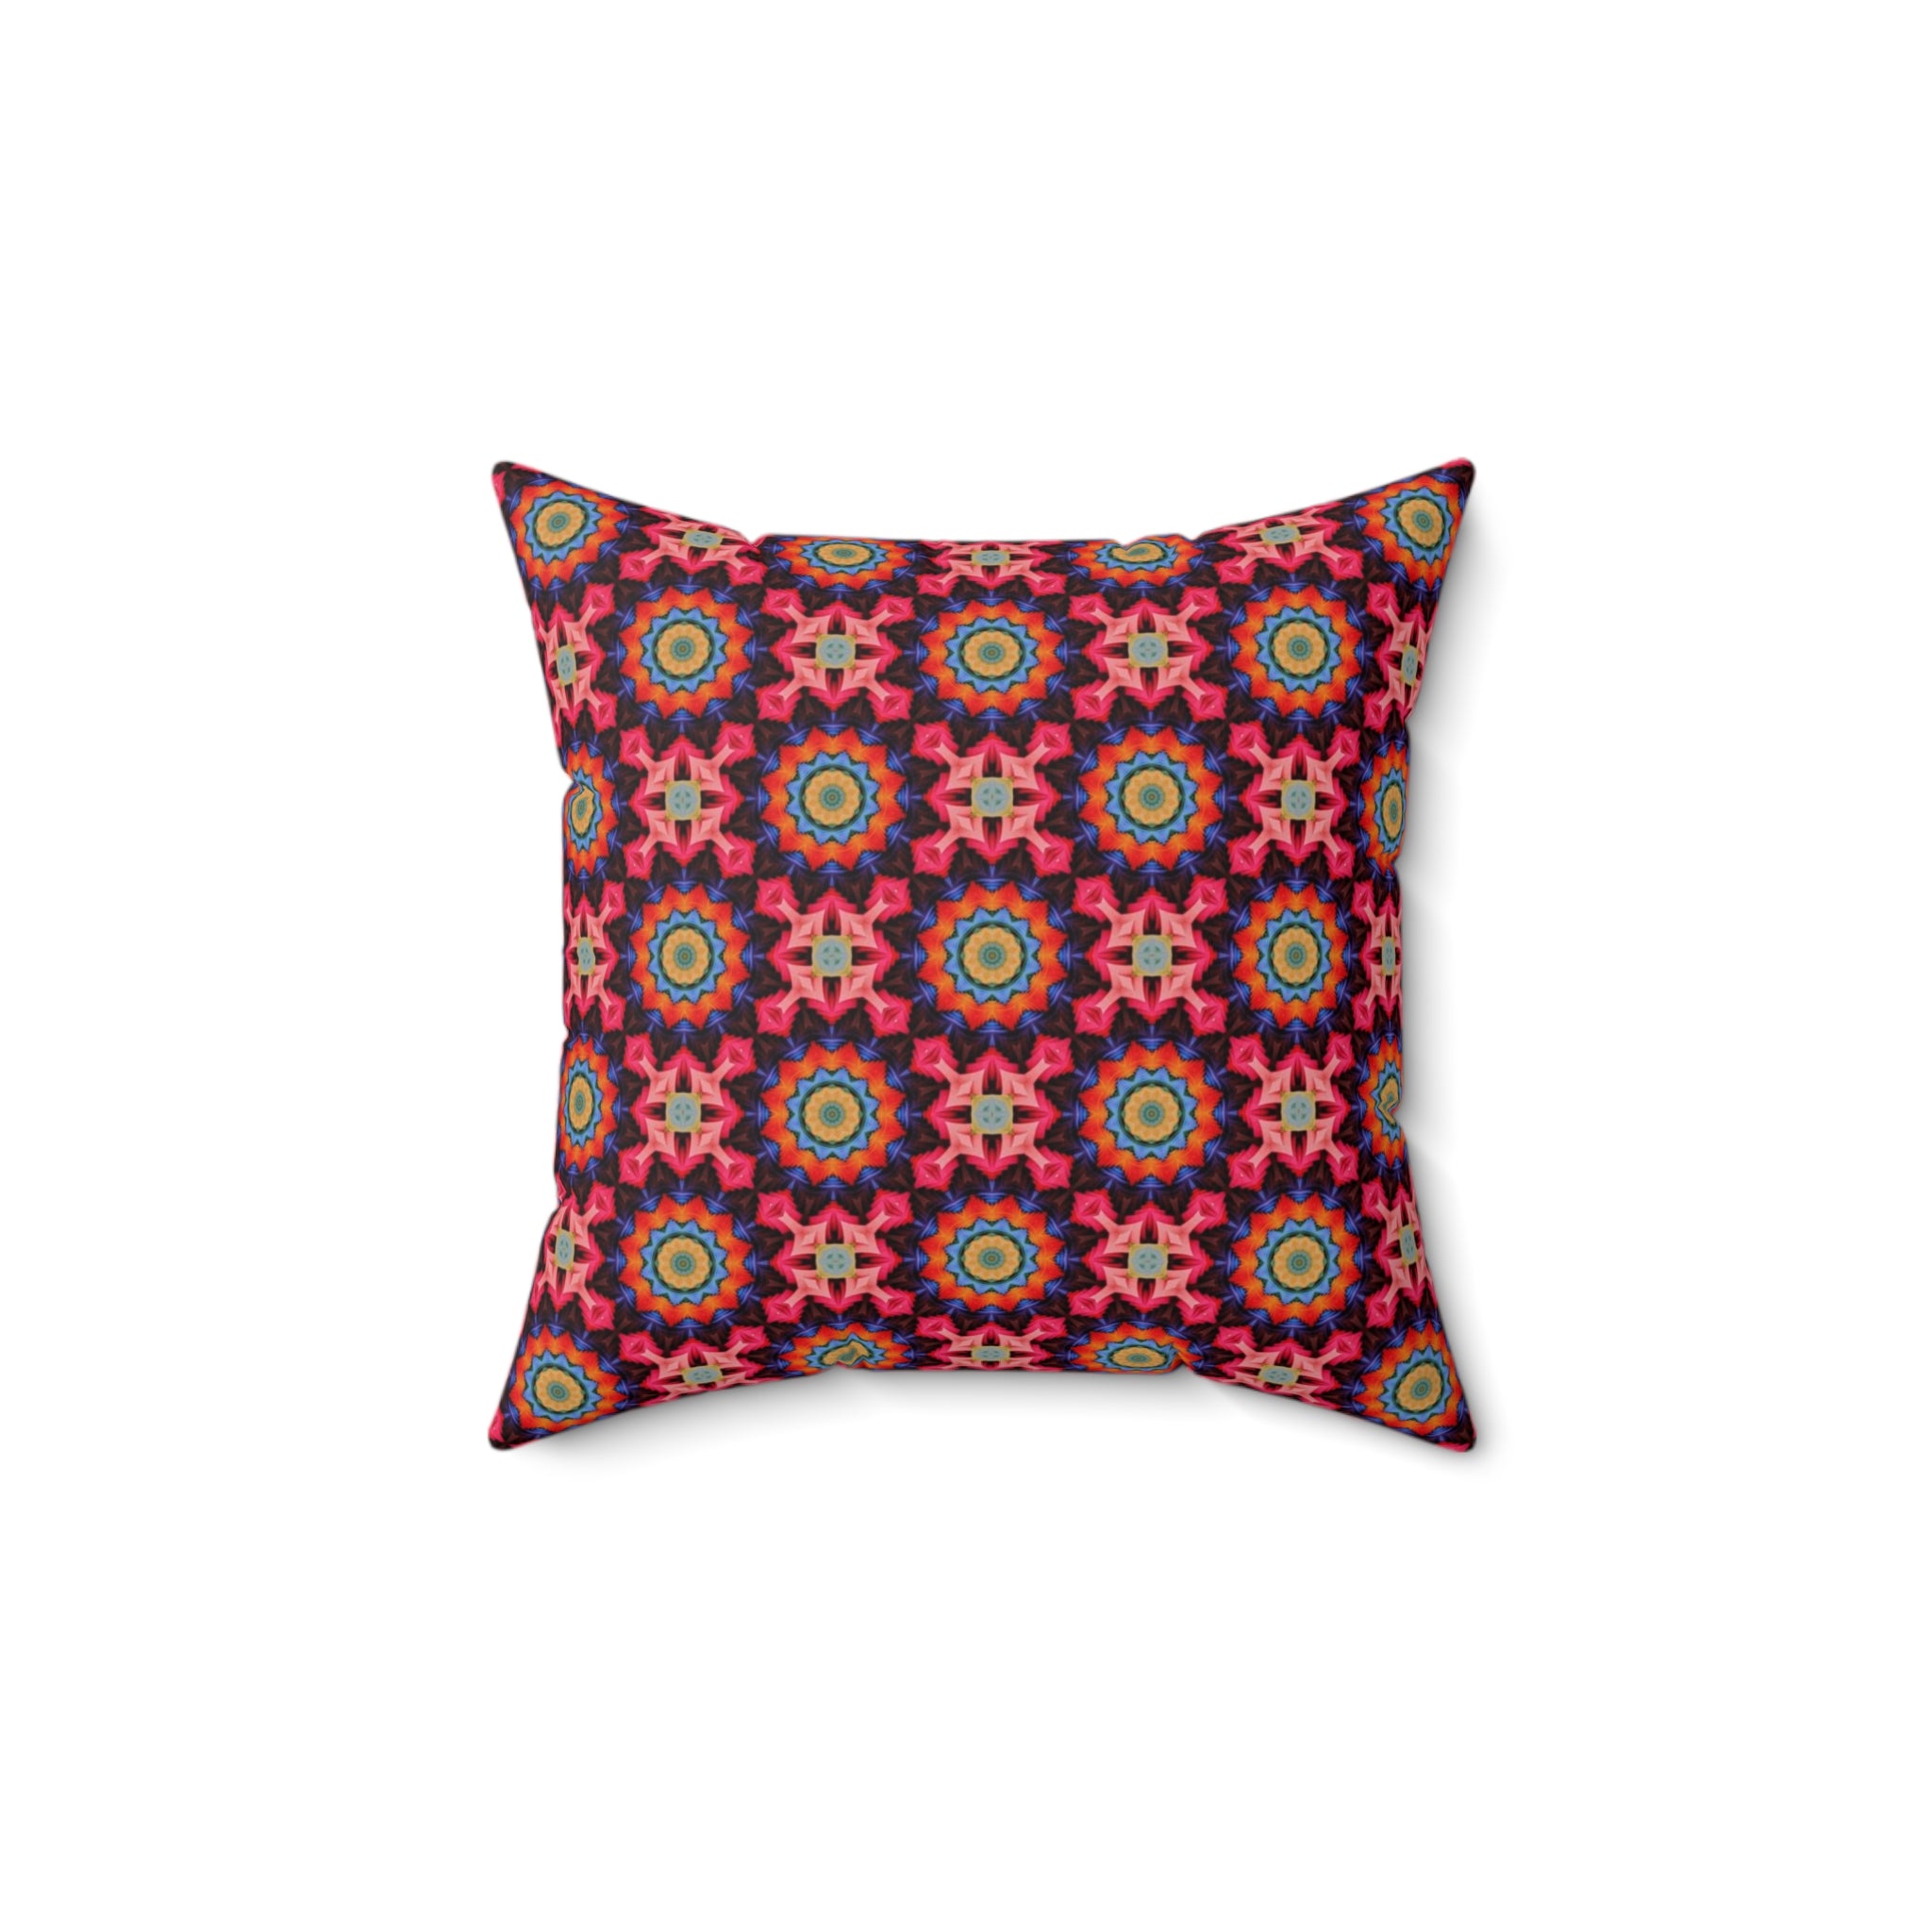 Kaleidoscope Pattern Square Pillow - Spun Polyester Square Pillow - Home Decor - Couch Pillows